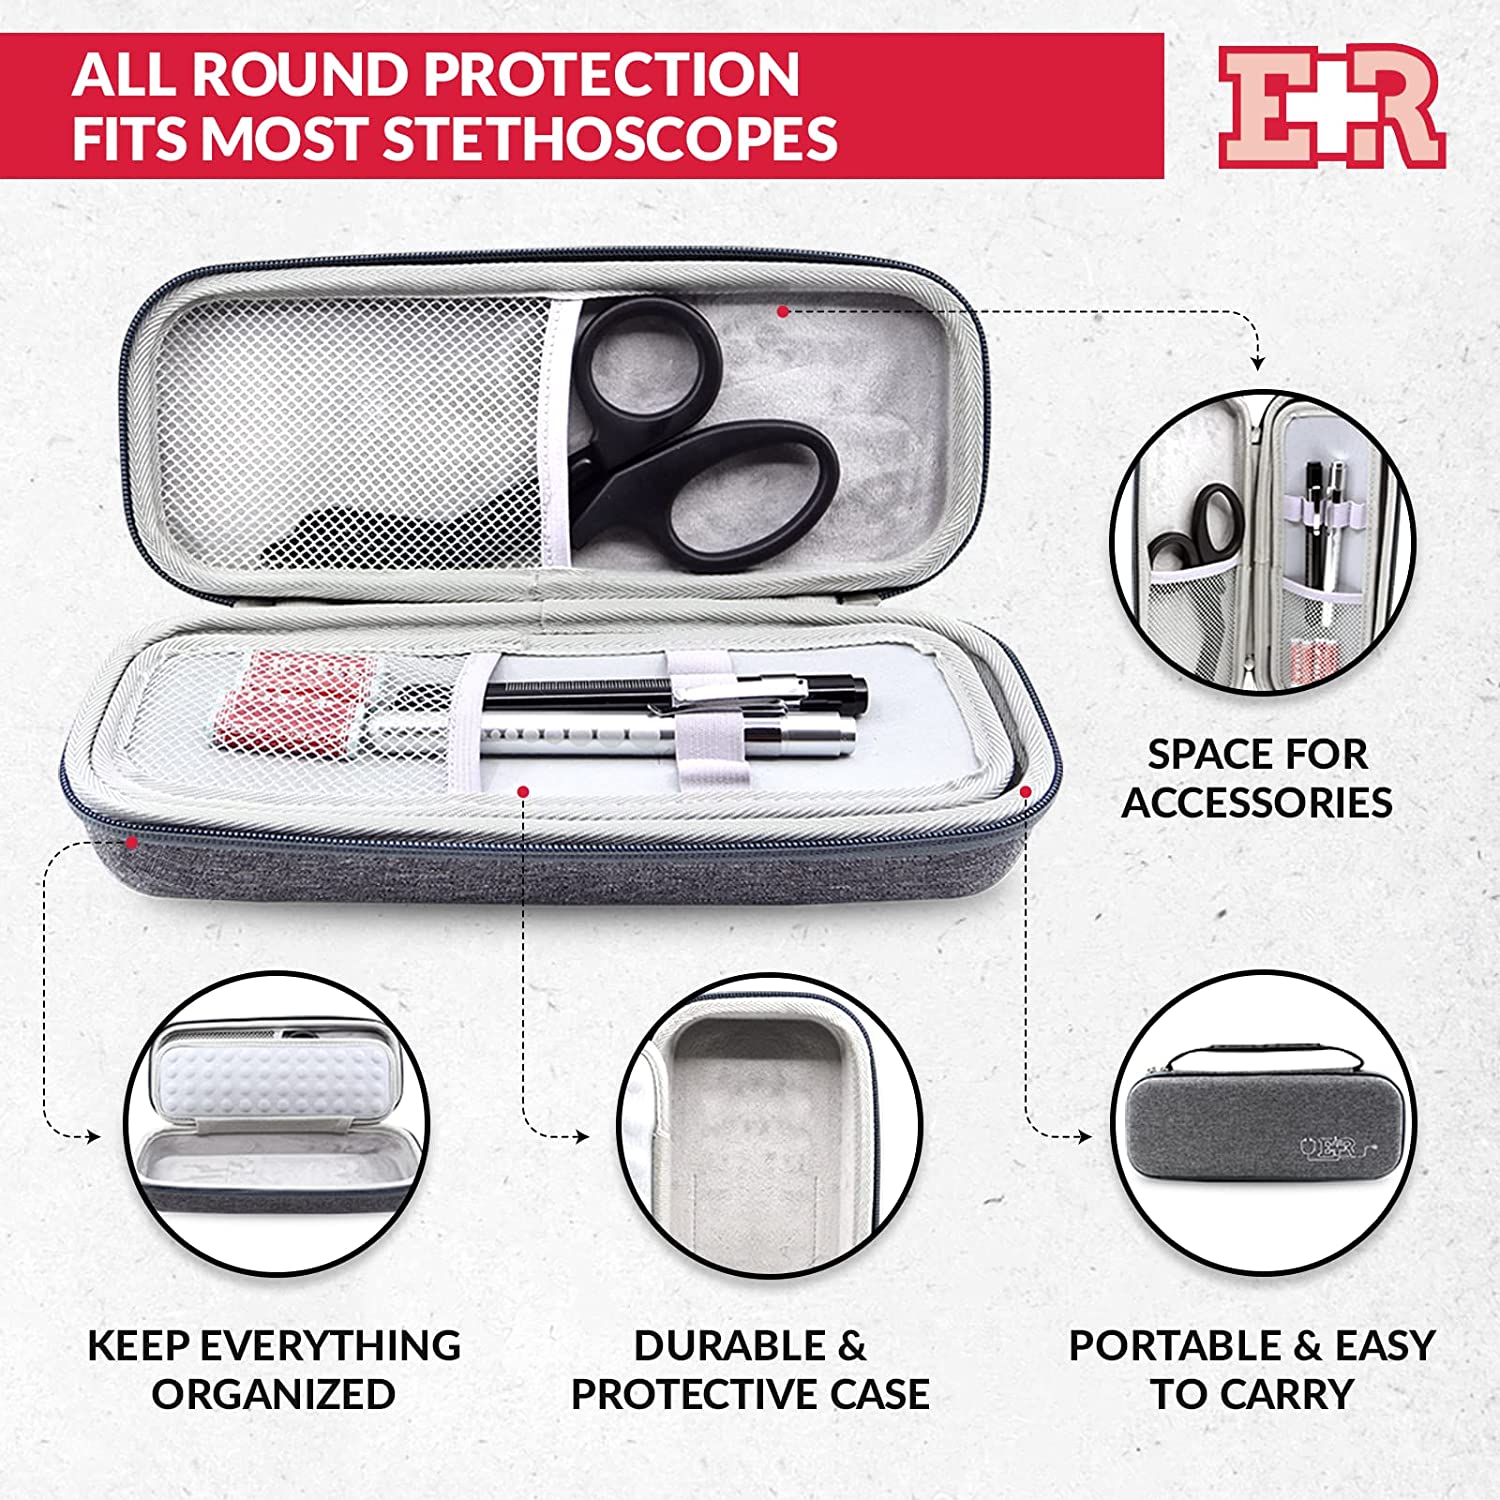 Ever Ready First Aid Stethoscope Case, Grey - with Titanium Shears